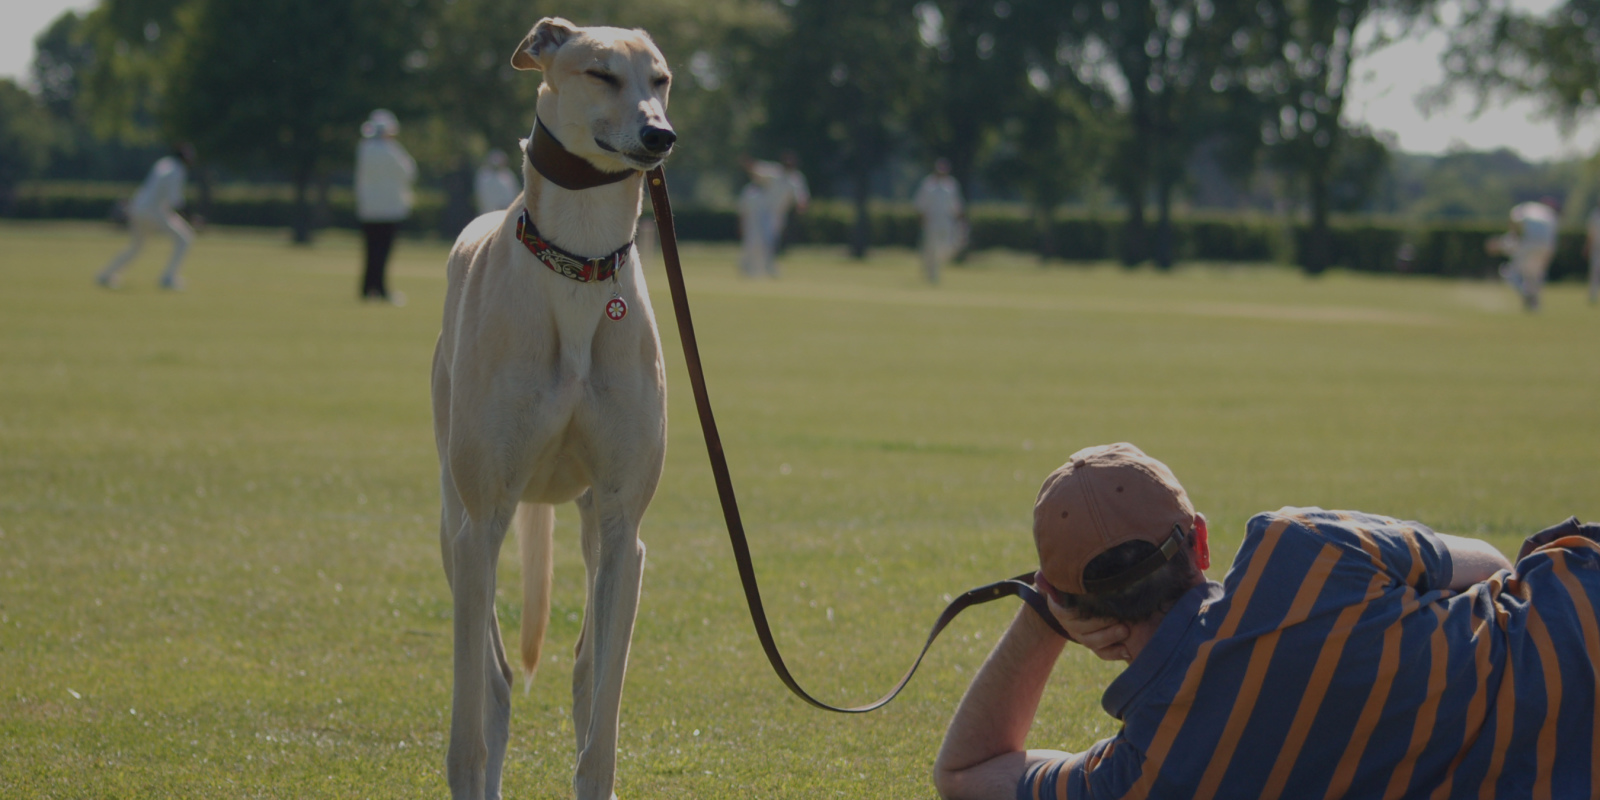 Fawn female greyhound standing at cricket match